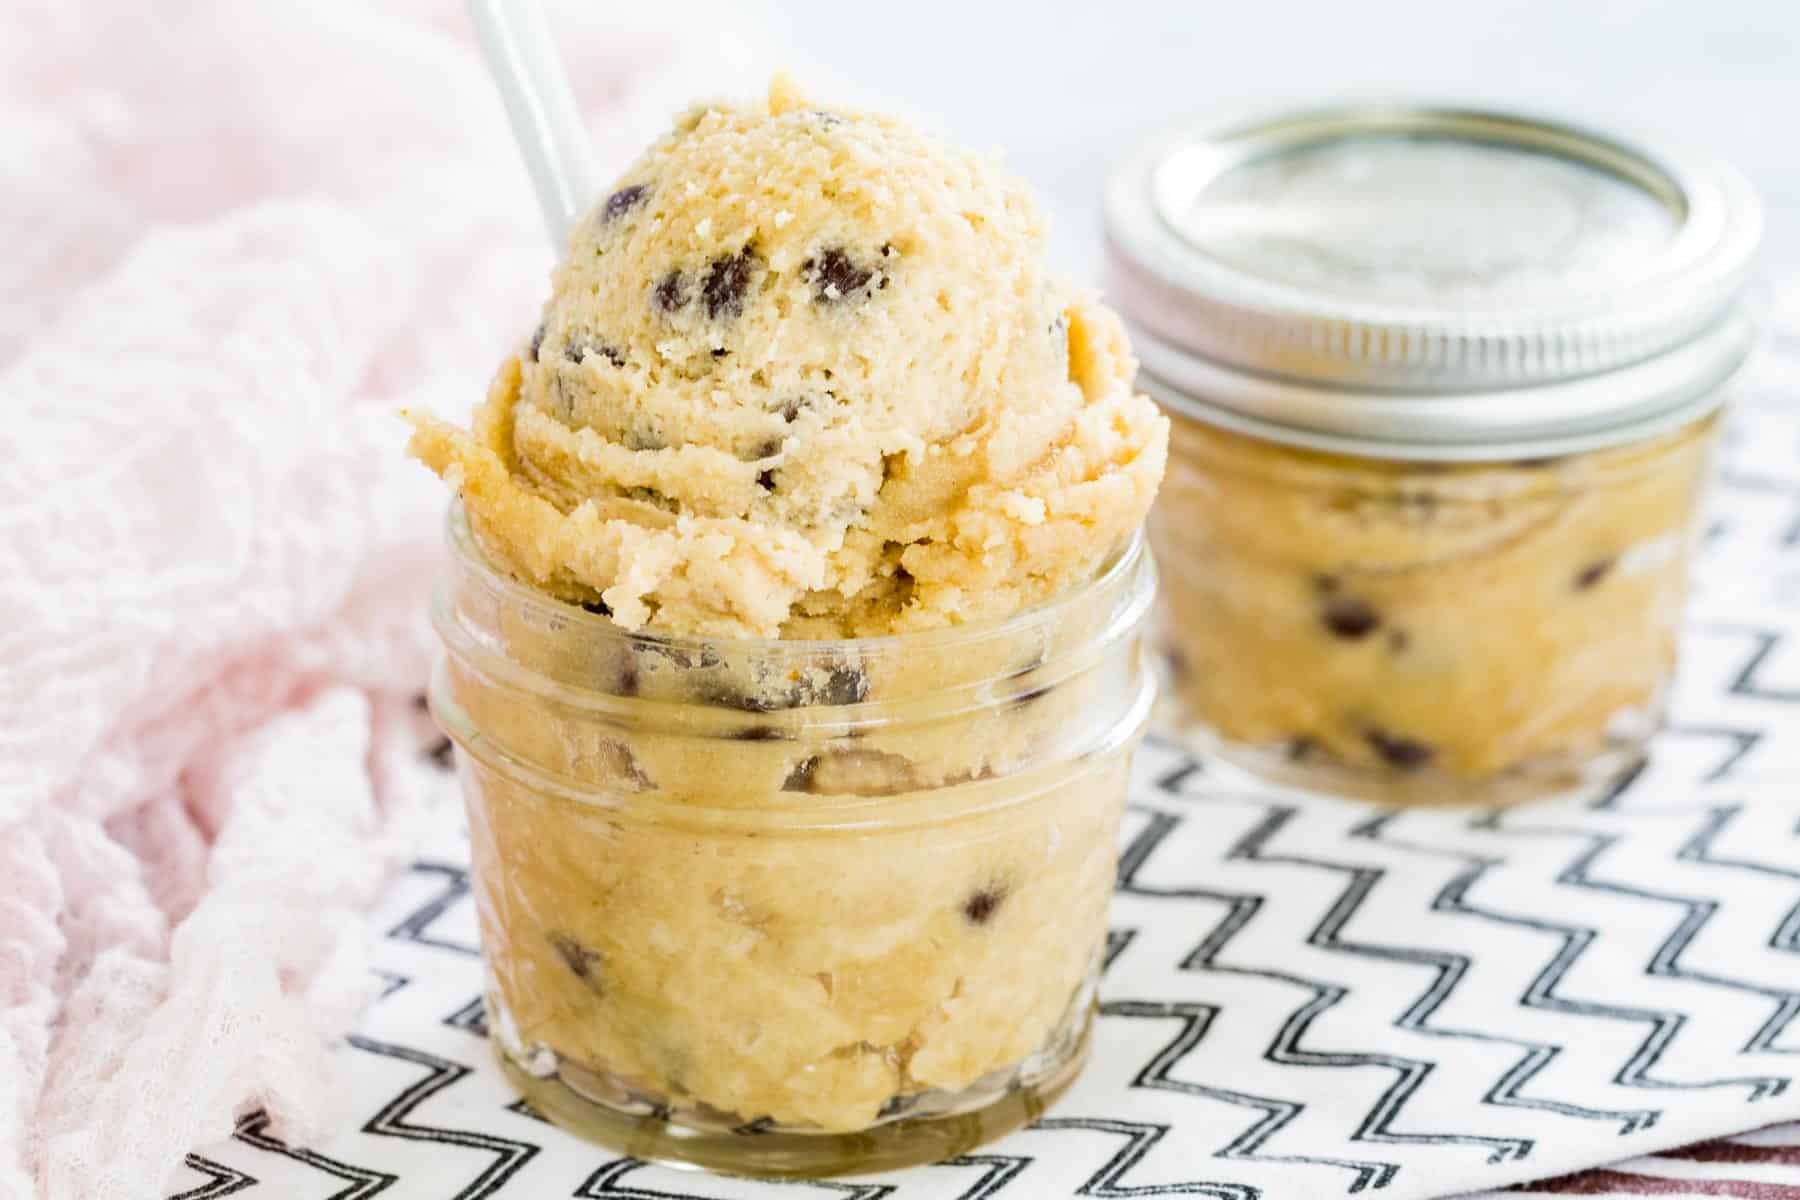 Gluten-free chocolate chip cookie dough in a glass jar with a white spoon.